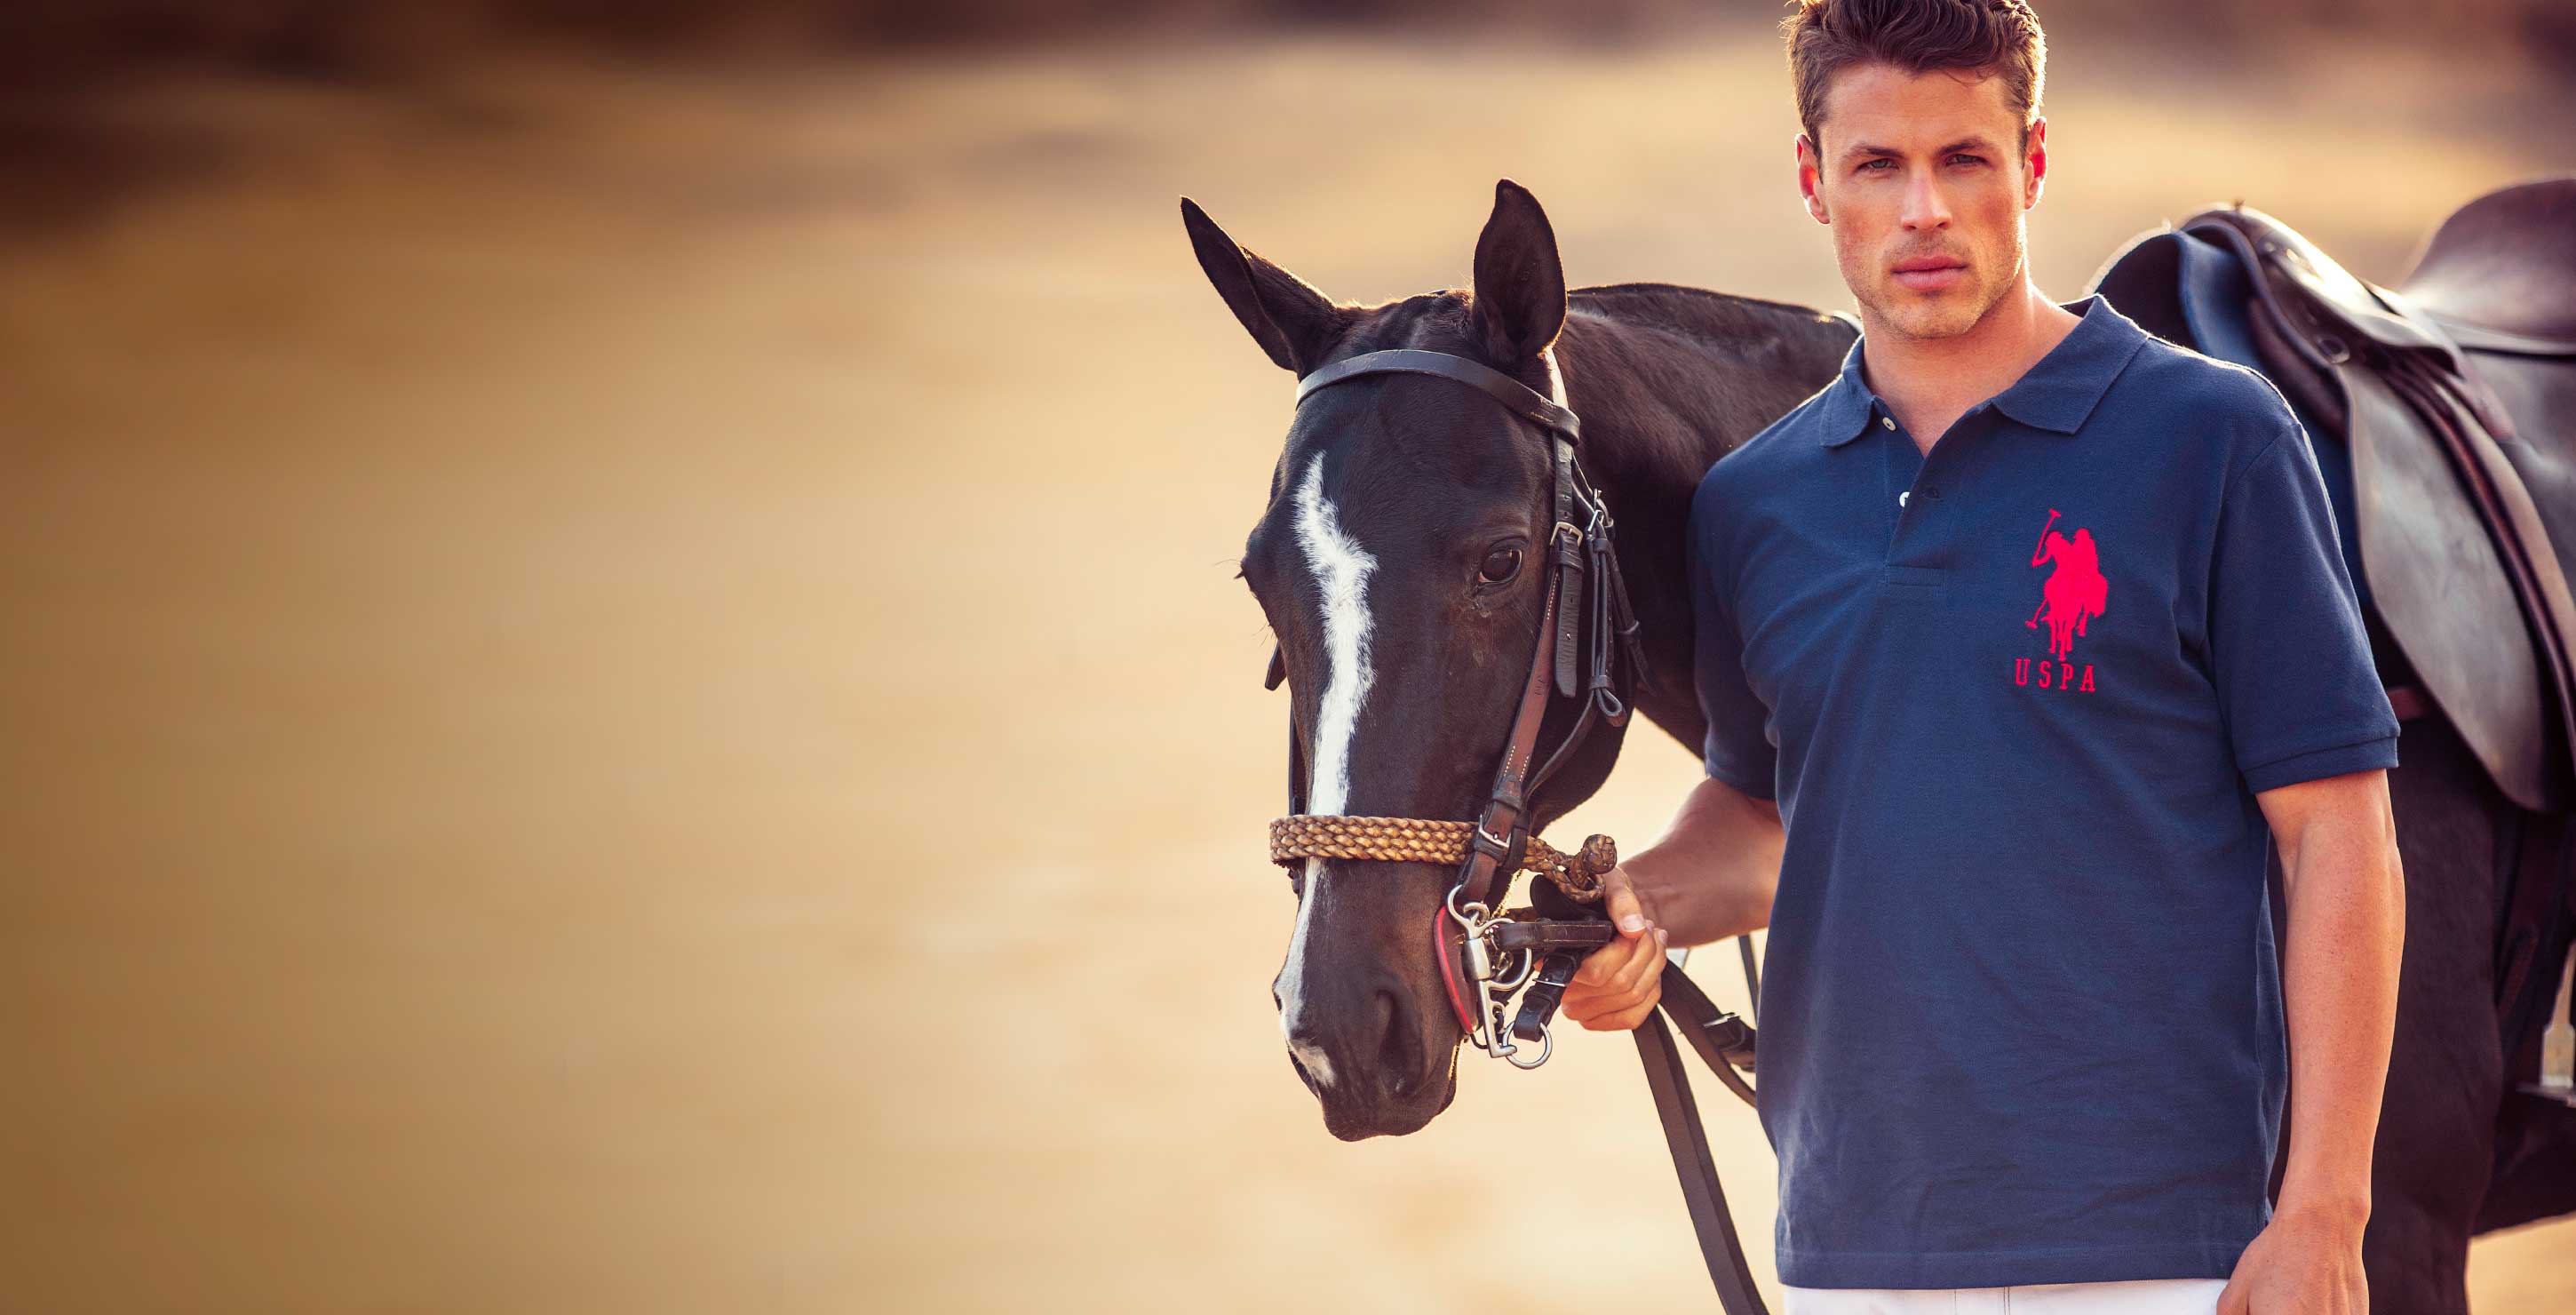 Ralph Lauren V United States Polo Association Lawyer In Lanvin